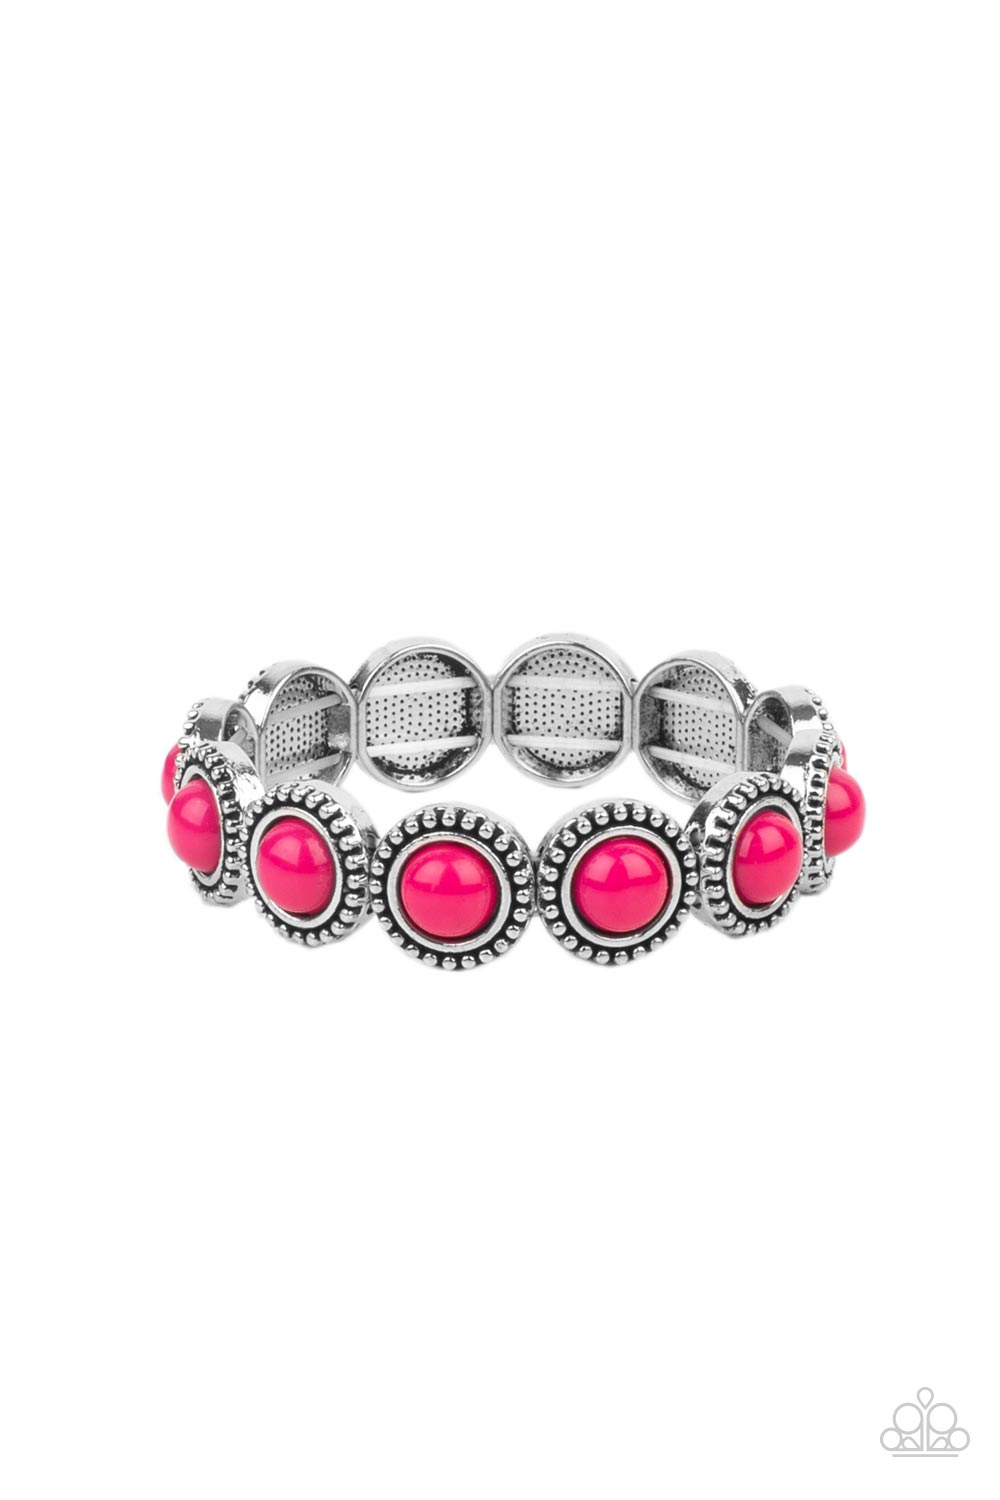 Polished Promenade - Pink Raspberry - Silver Stretchy Bracelet - Paparazzi Accessories - Silver frames encase polished Raspberry Sorbet beads. The eye-catching series of fanciful beads are threaded along a stretchy band and promenade around the wrist for a whimsical look. 